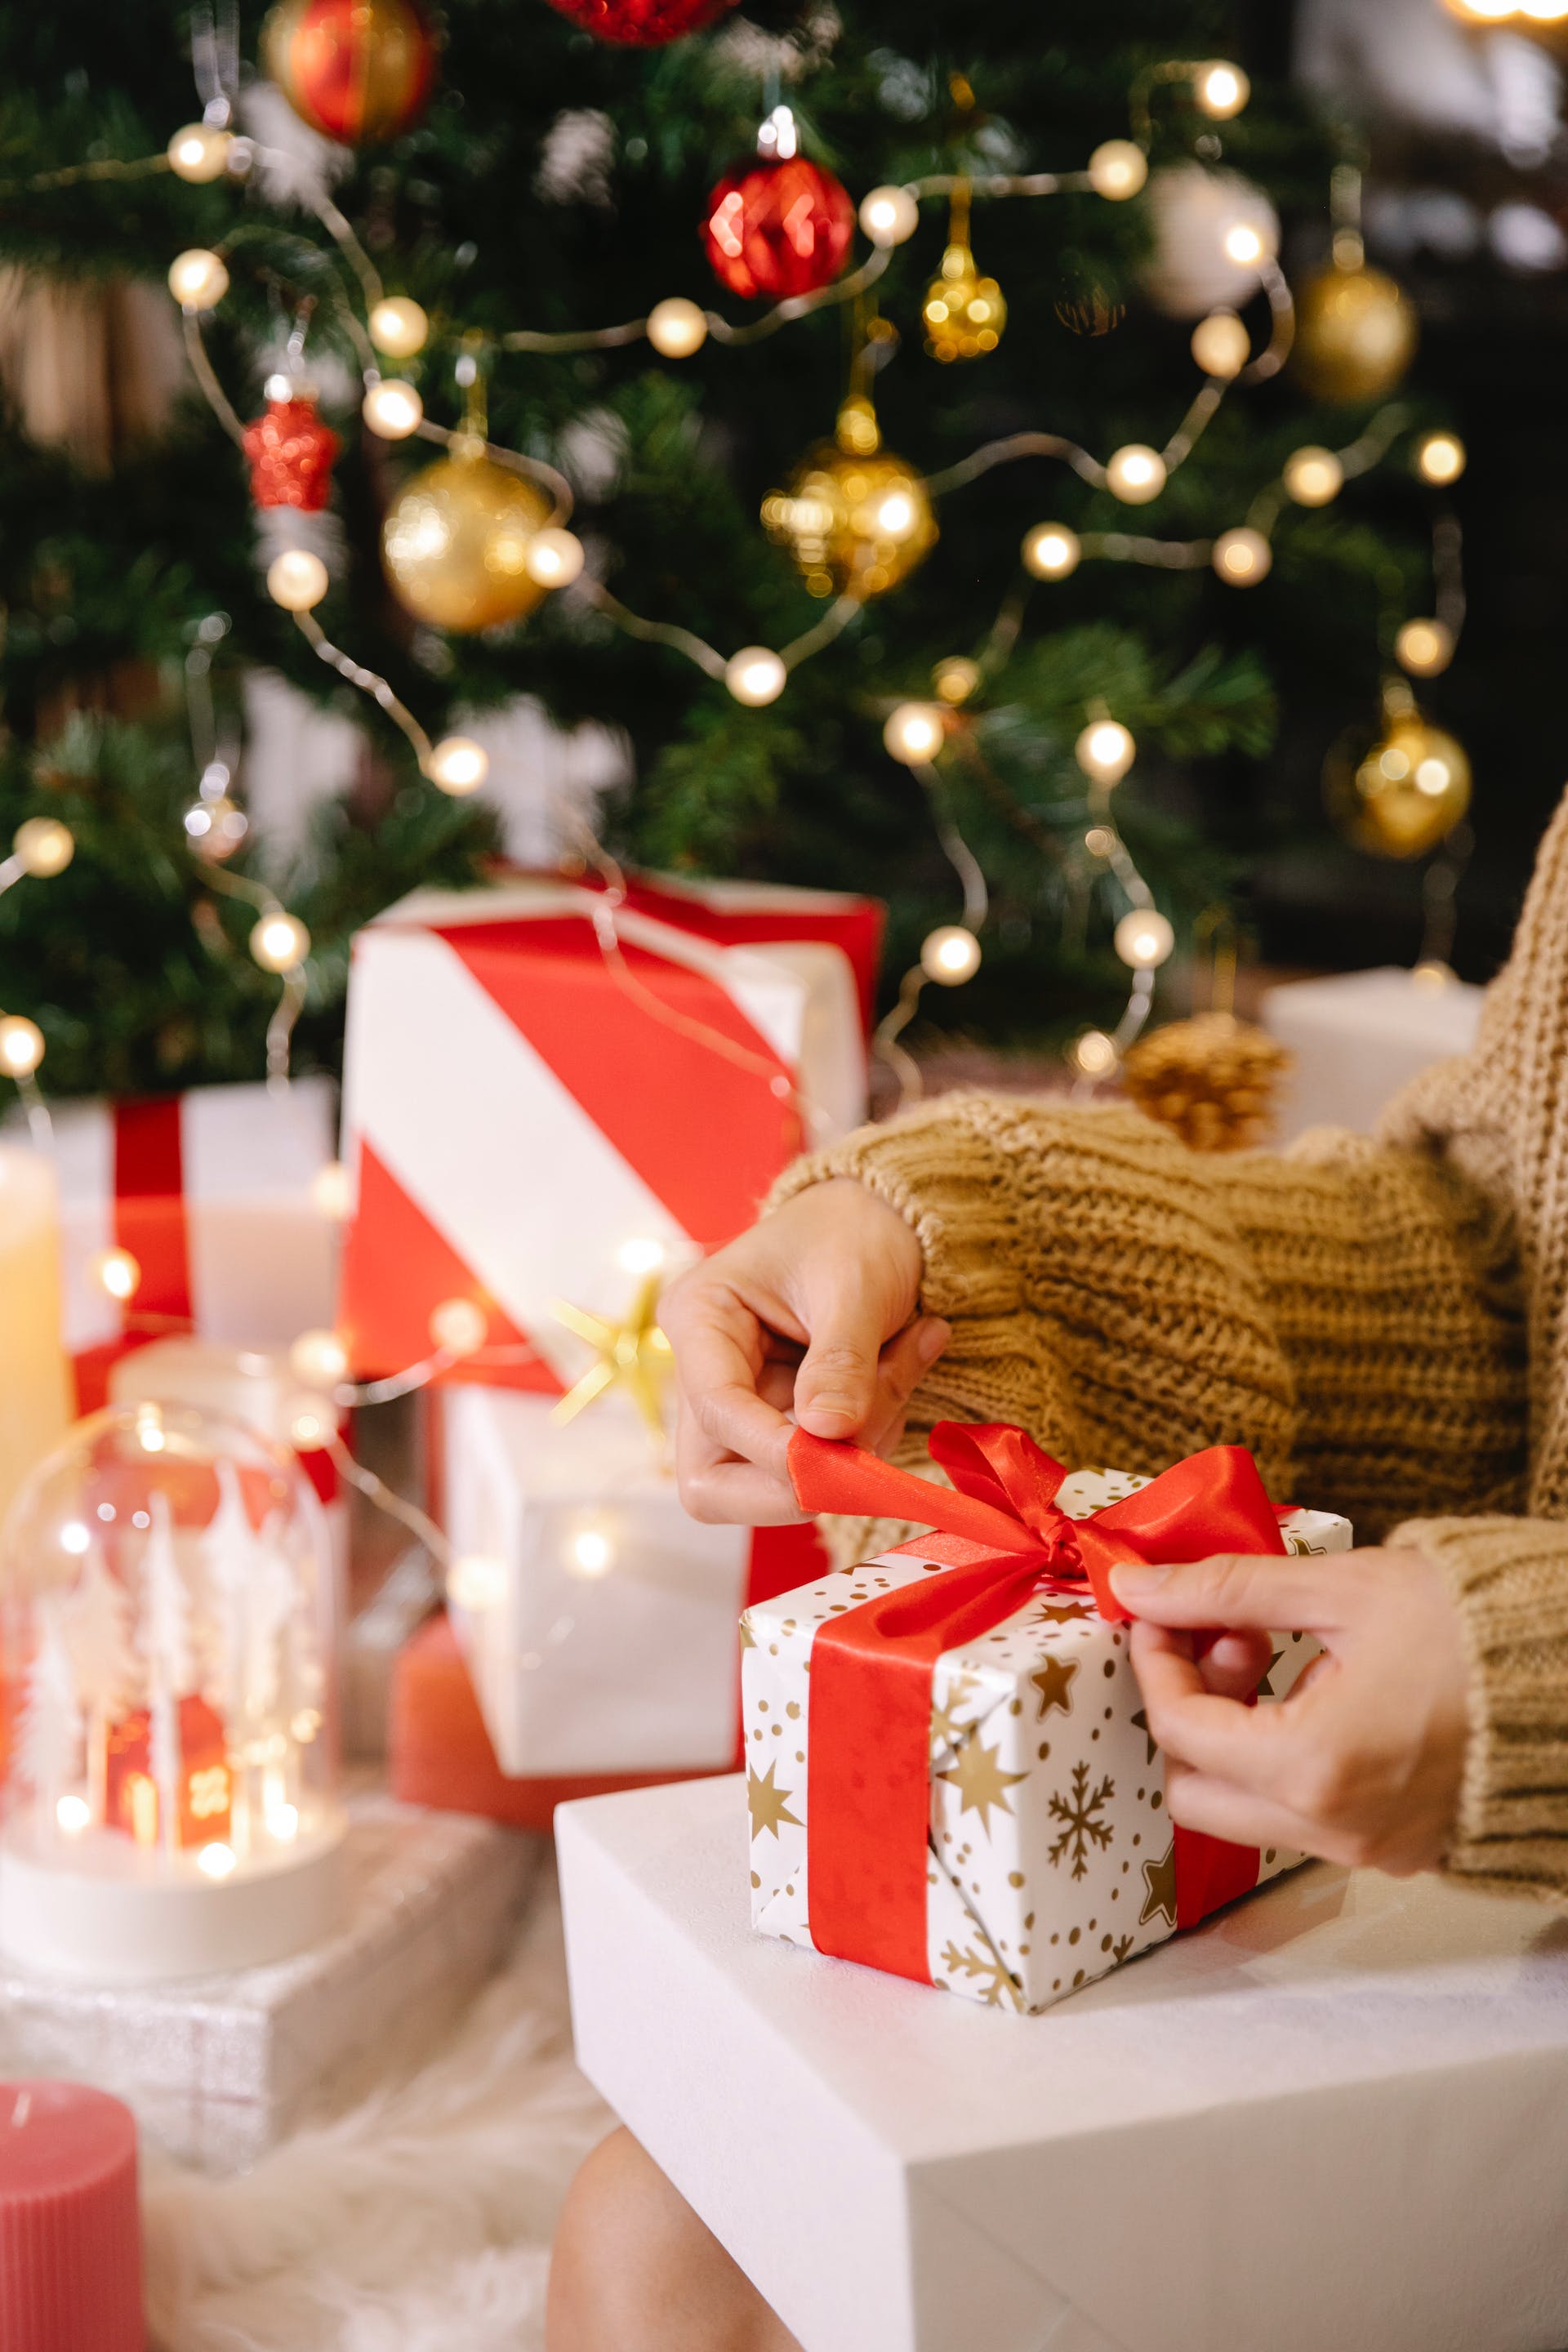 Woman wrapping a gift box near a Christmas tree | Source: Pexels